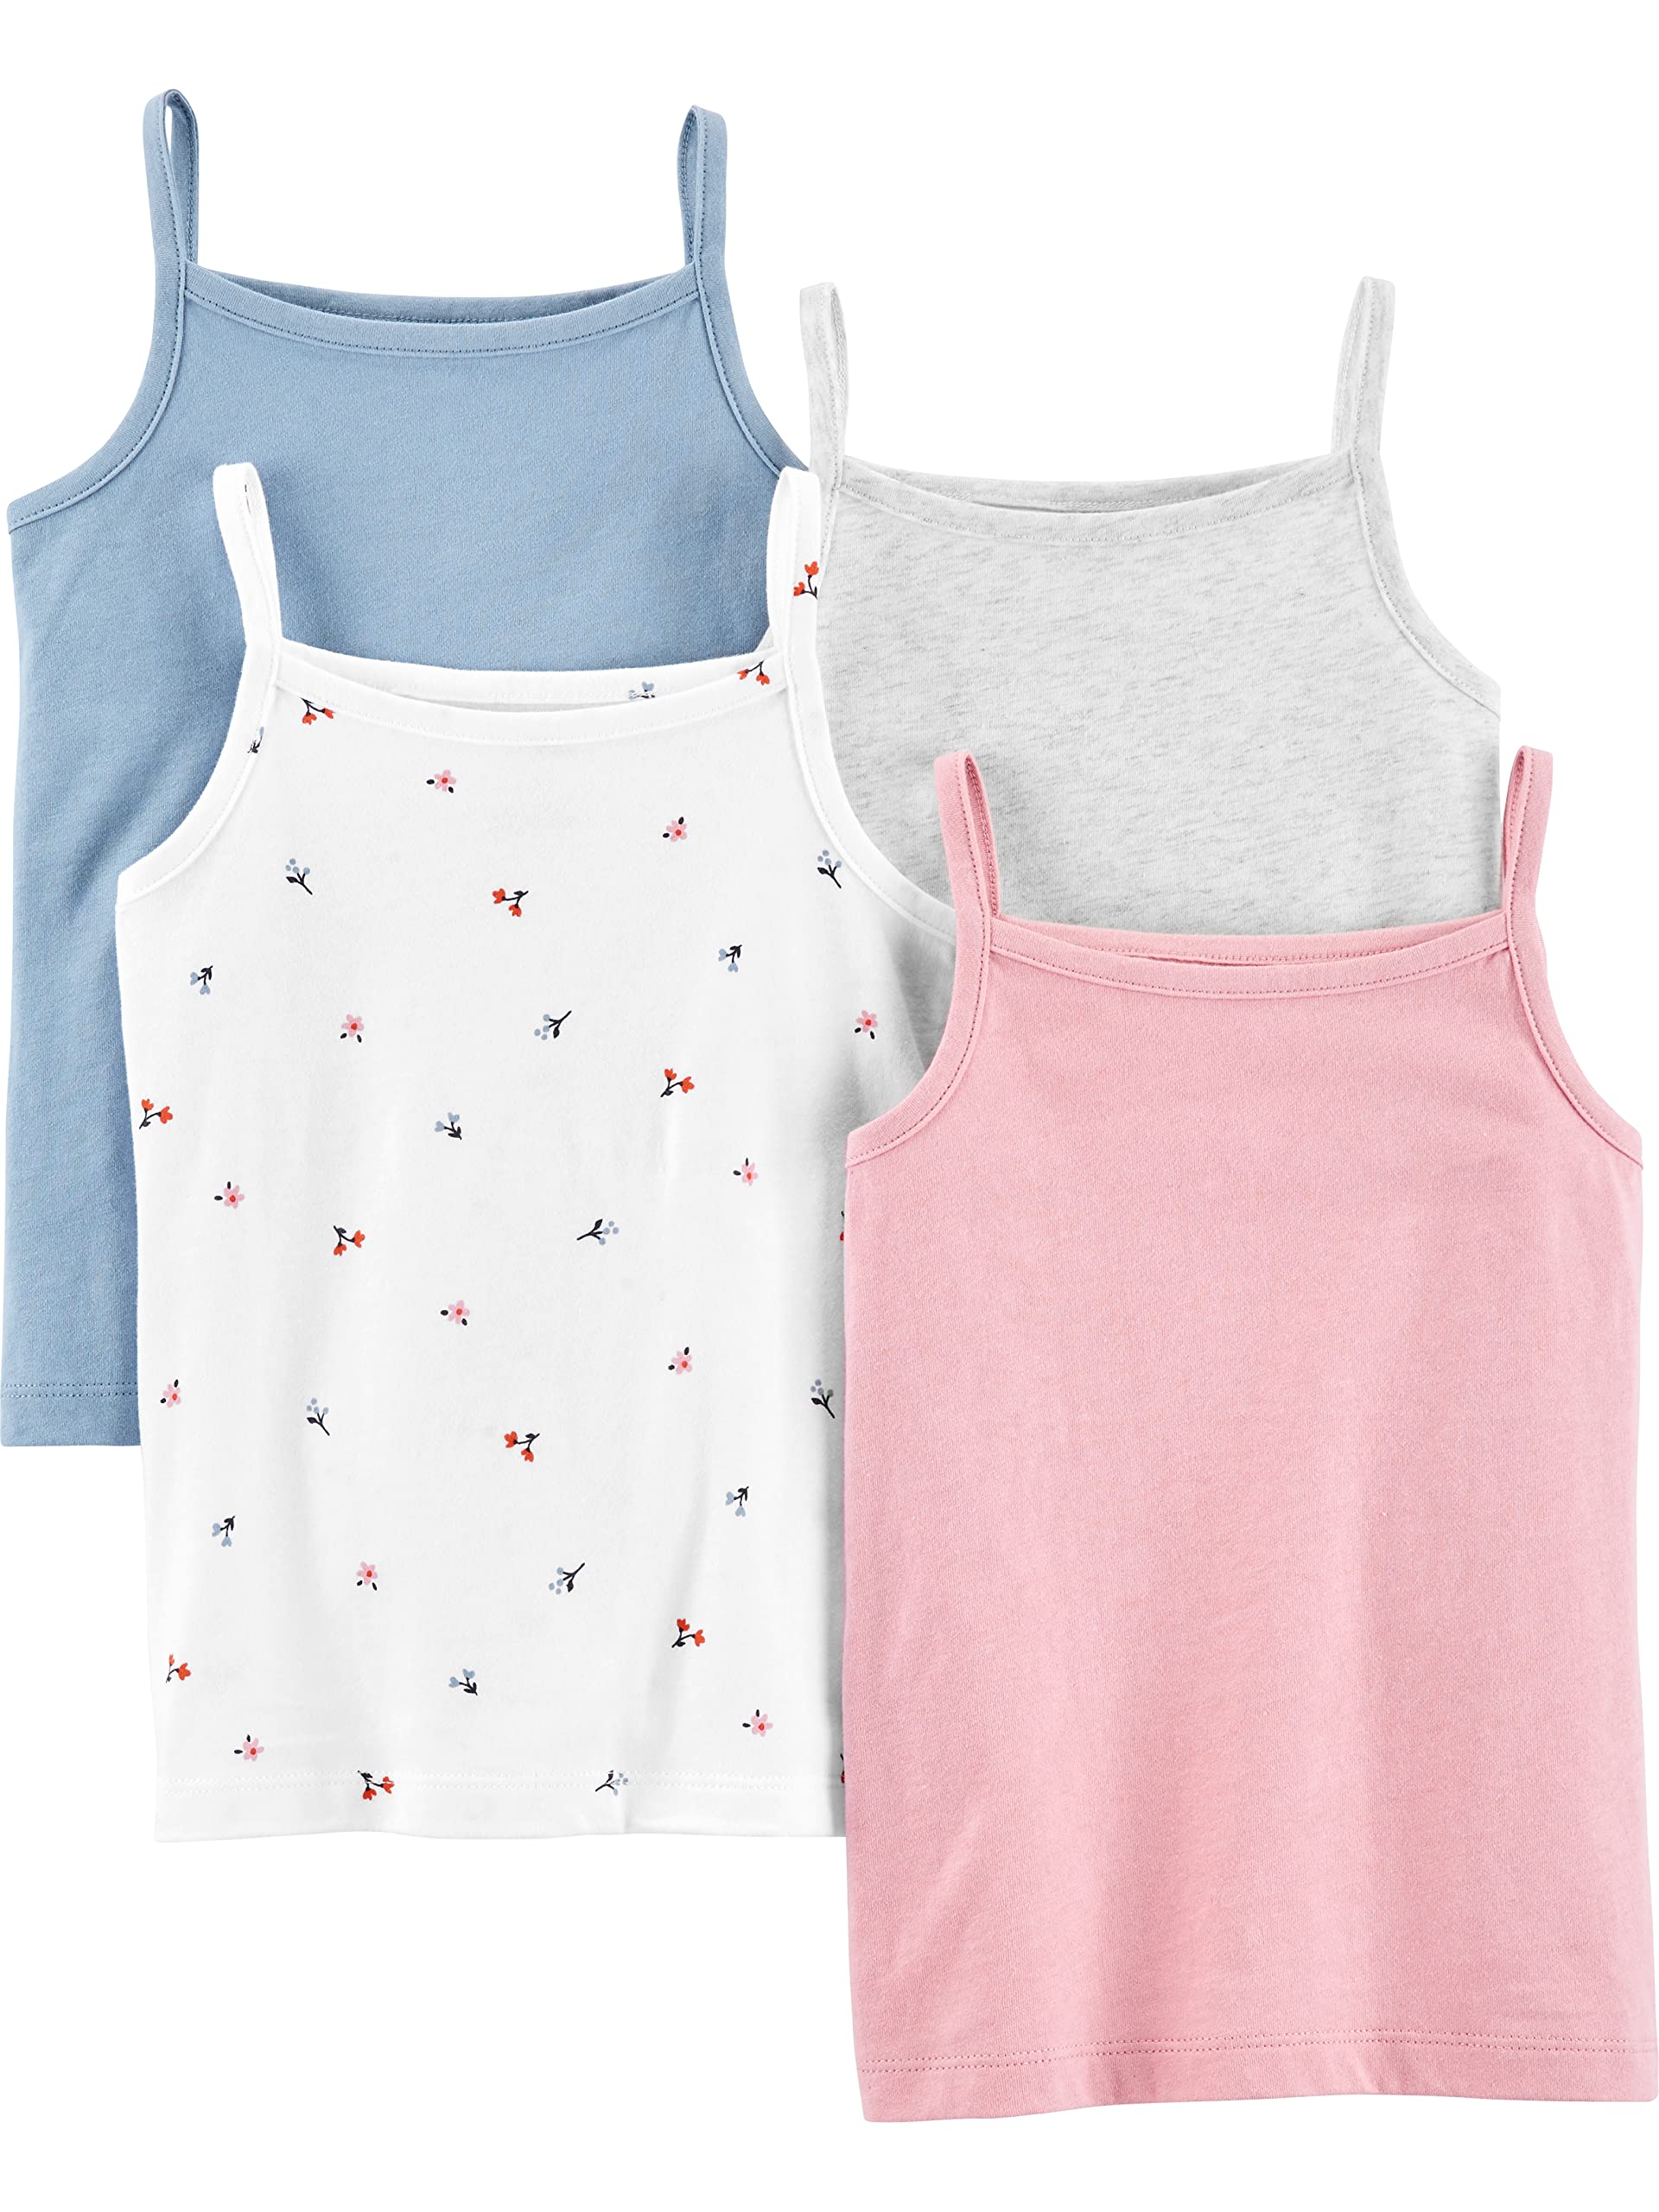 Simple Joys by Carter's Girls and Toddlers' Tank Tops, Pack of 4